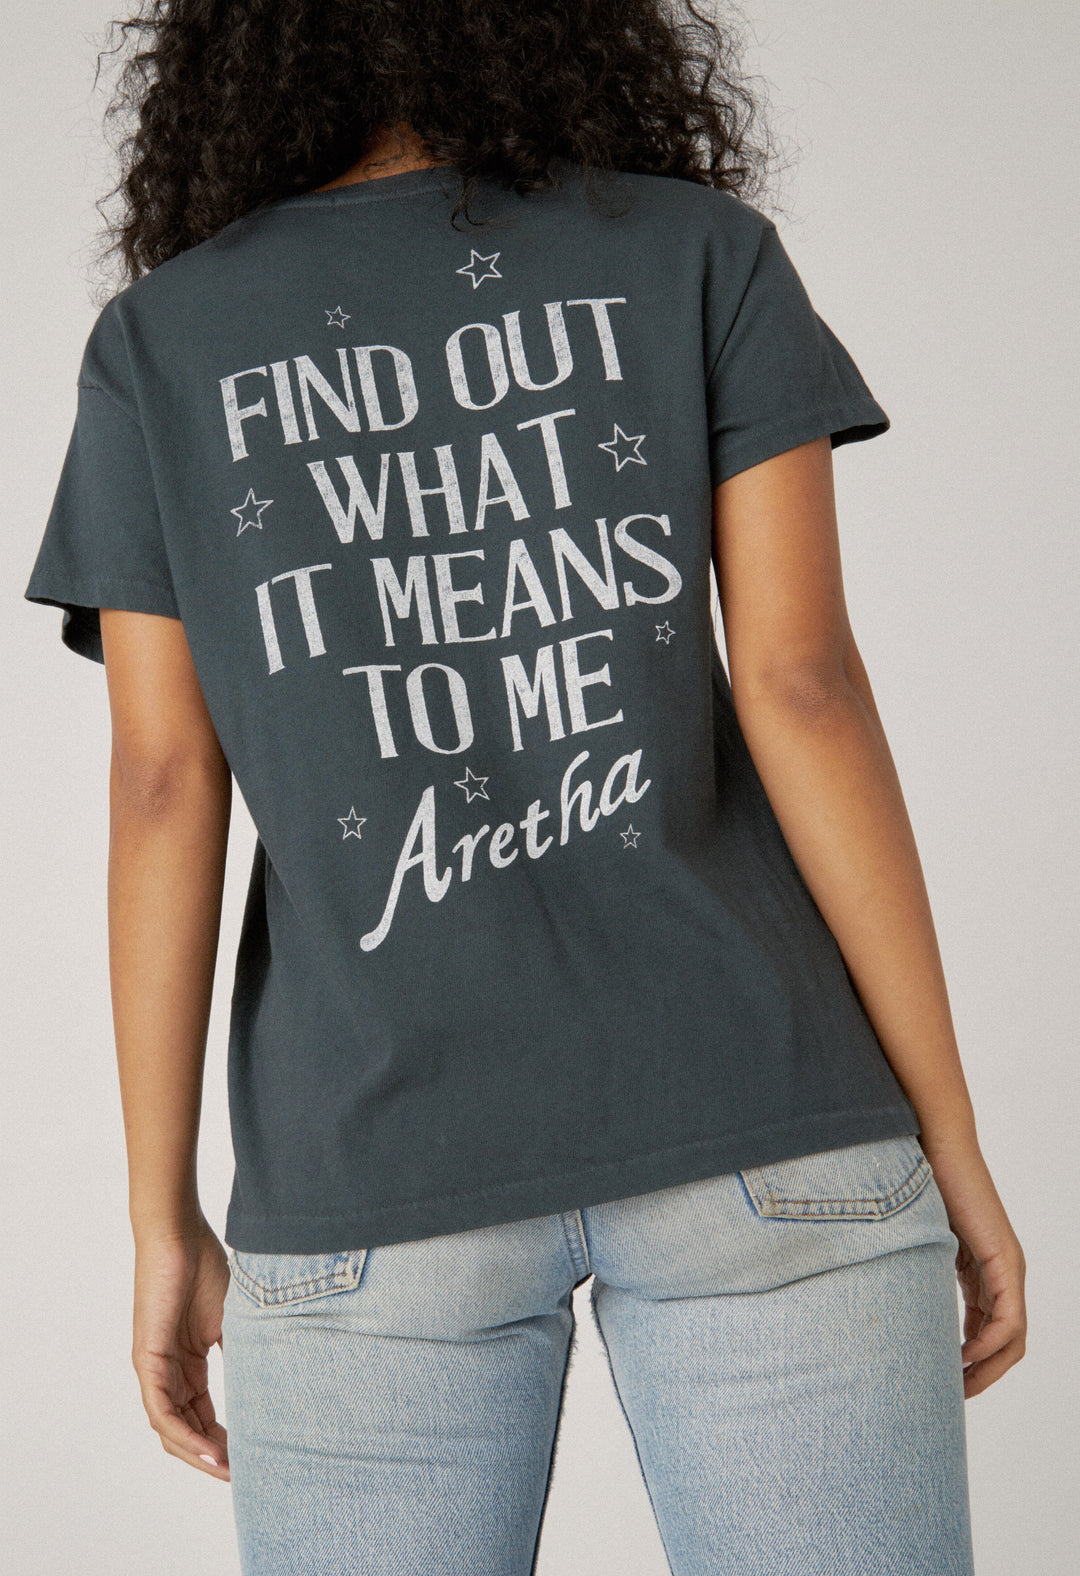 ARETHA RESPECT TOUR TEE - Kingfisher Road - Online Boutique